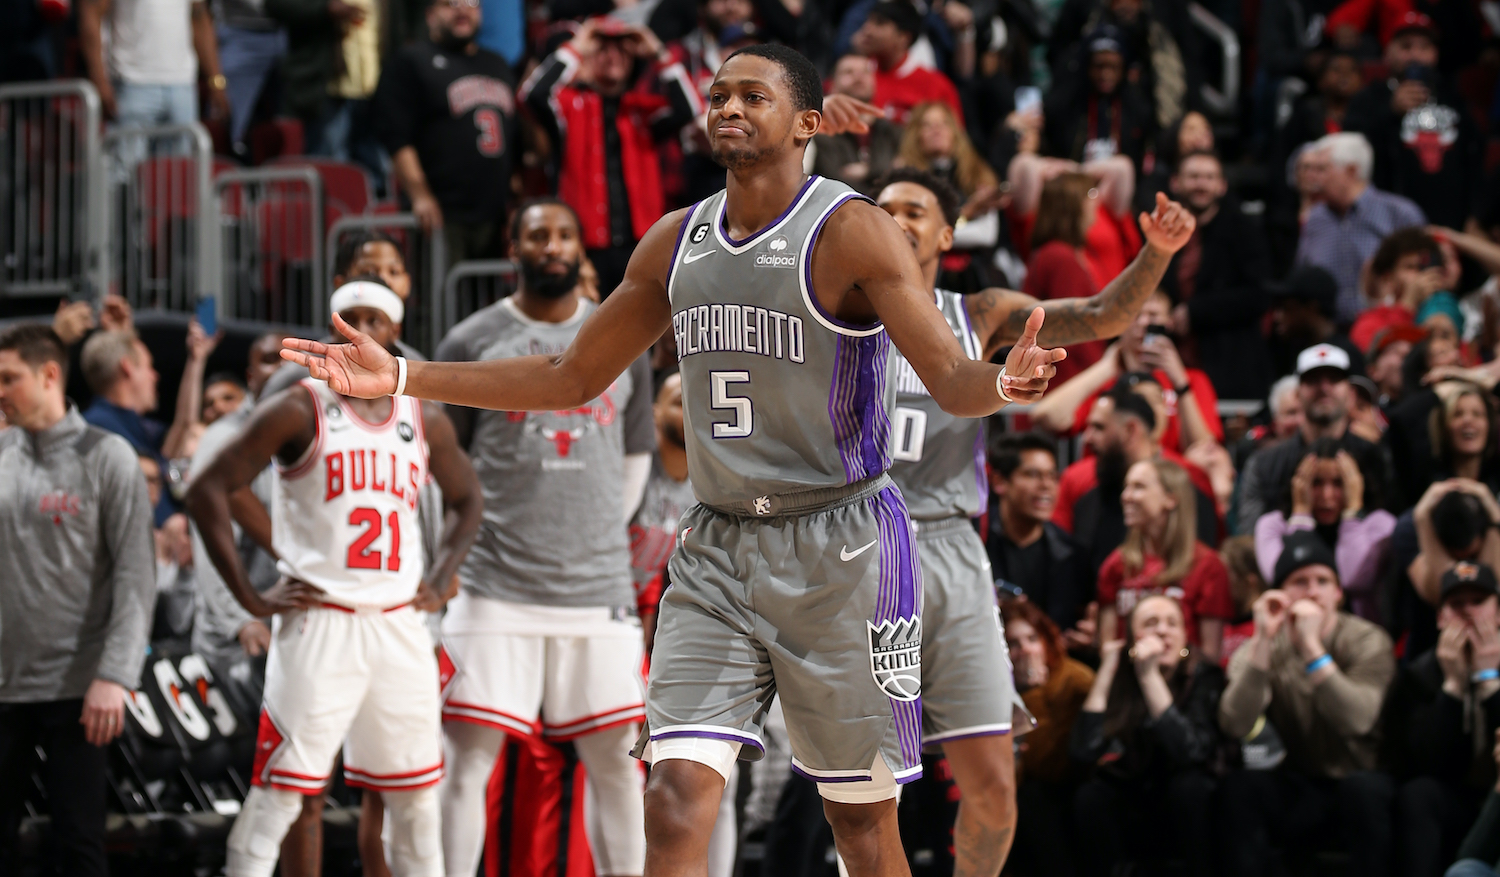 CHICAGO, IL - MARCH 15: De'Aaron Fox #5 of the Sacramento Kings celebrates scoring a three point basket to win the game against the Chicago Bulls on March 15, 2023 at United Center in Chicago, Illinois. NOTE TO USER: User expressly acknowledges and agrees that, by downloading and or using this photograph, User is consenting to the terms and conditions of the Getty Images License Agreement. Mandatory Copyright Notice: Copyright 2023 NBAE (Photo by Gary Dineen/NBAE via Getty Images)